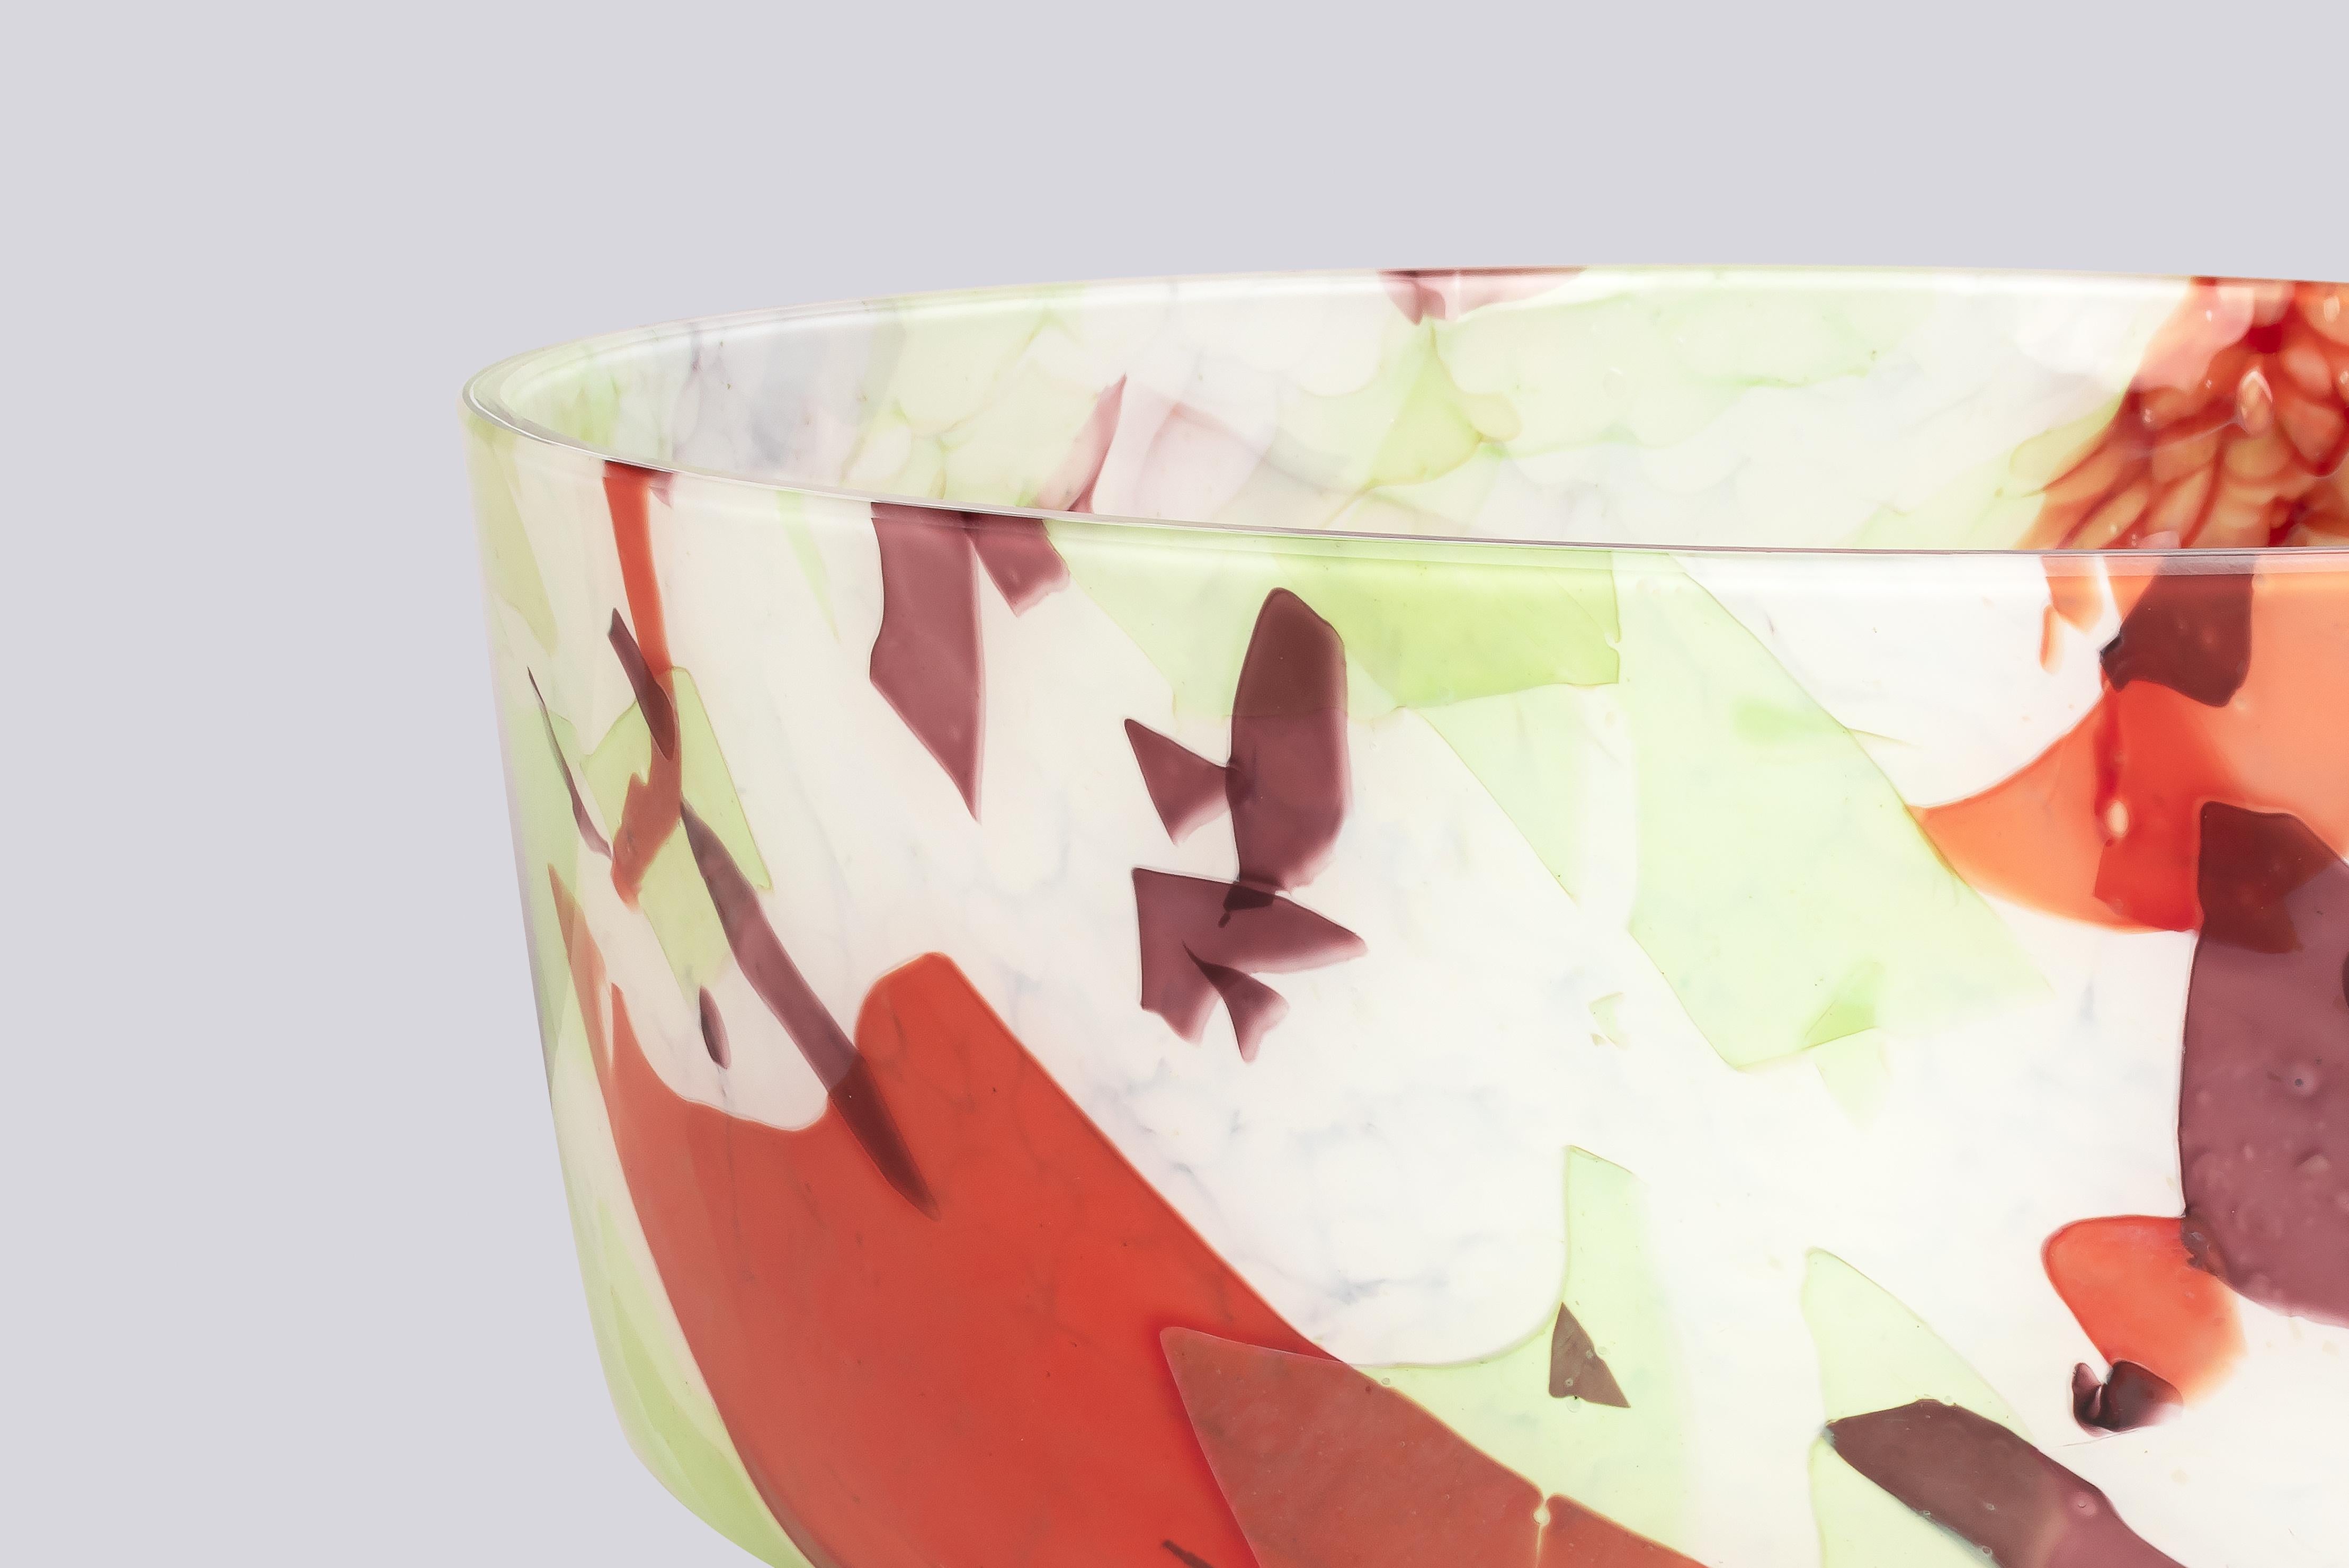 Crafted by skilled artisans from Murano, Italy, this exquisite vessel showcases a blossoming fusion of spring's colors. Green, amethyst, and red hues are delicately arranged on an ivory base, embodying impeccable craftsmanship. Each element captures